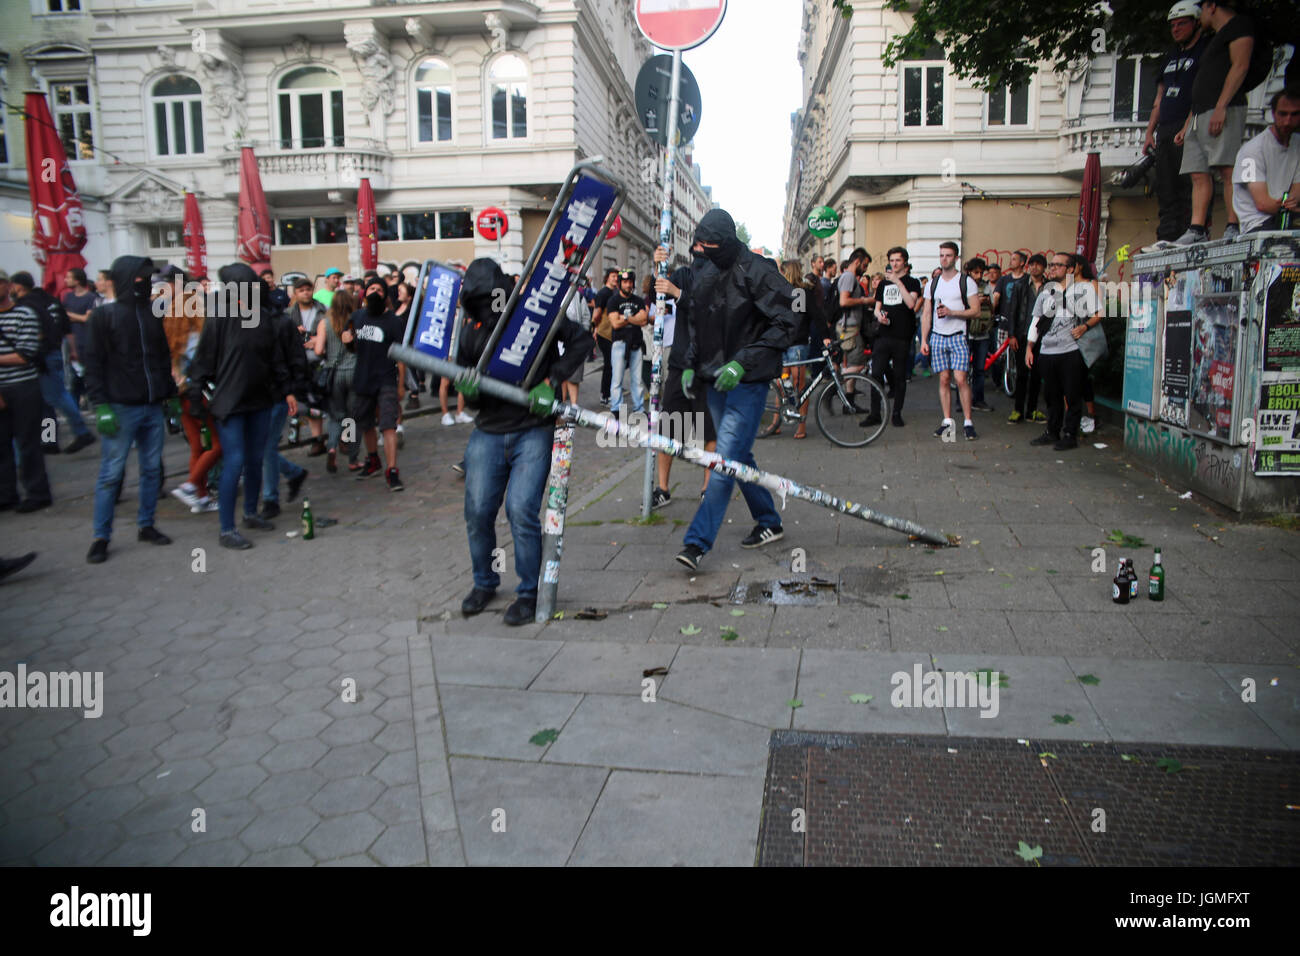 Hamburg, Germany. 07th July, 2017. At a protest against G20 at Schanzenviertel in Hamburg a heavy riot erupted between police and a few demonstrators. Credit: Alexander Pohl/Pacific Press/Alamy Live News Stock Photo